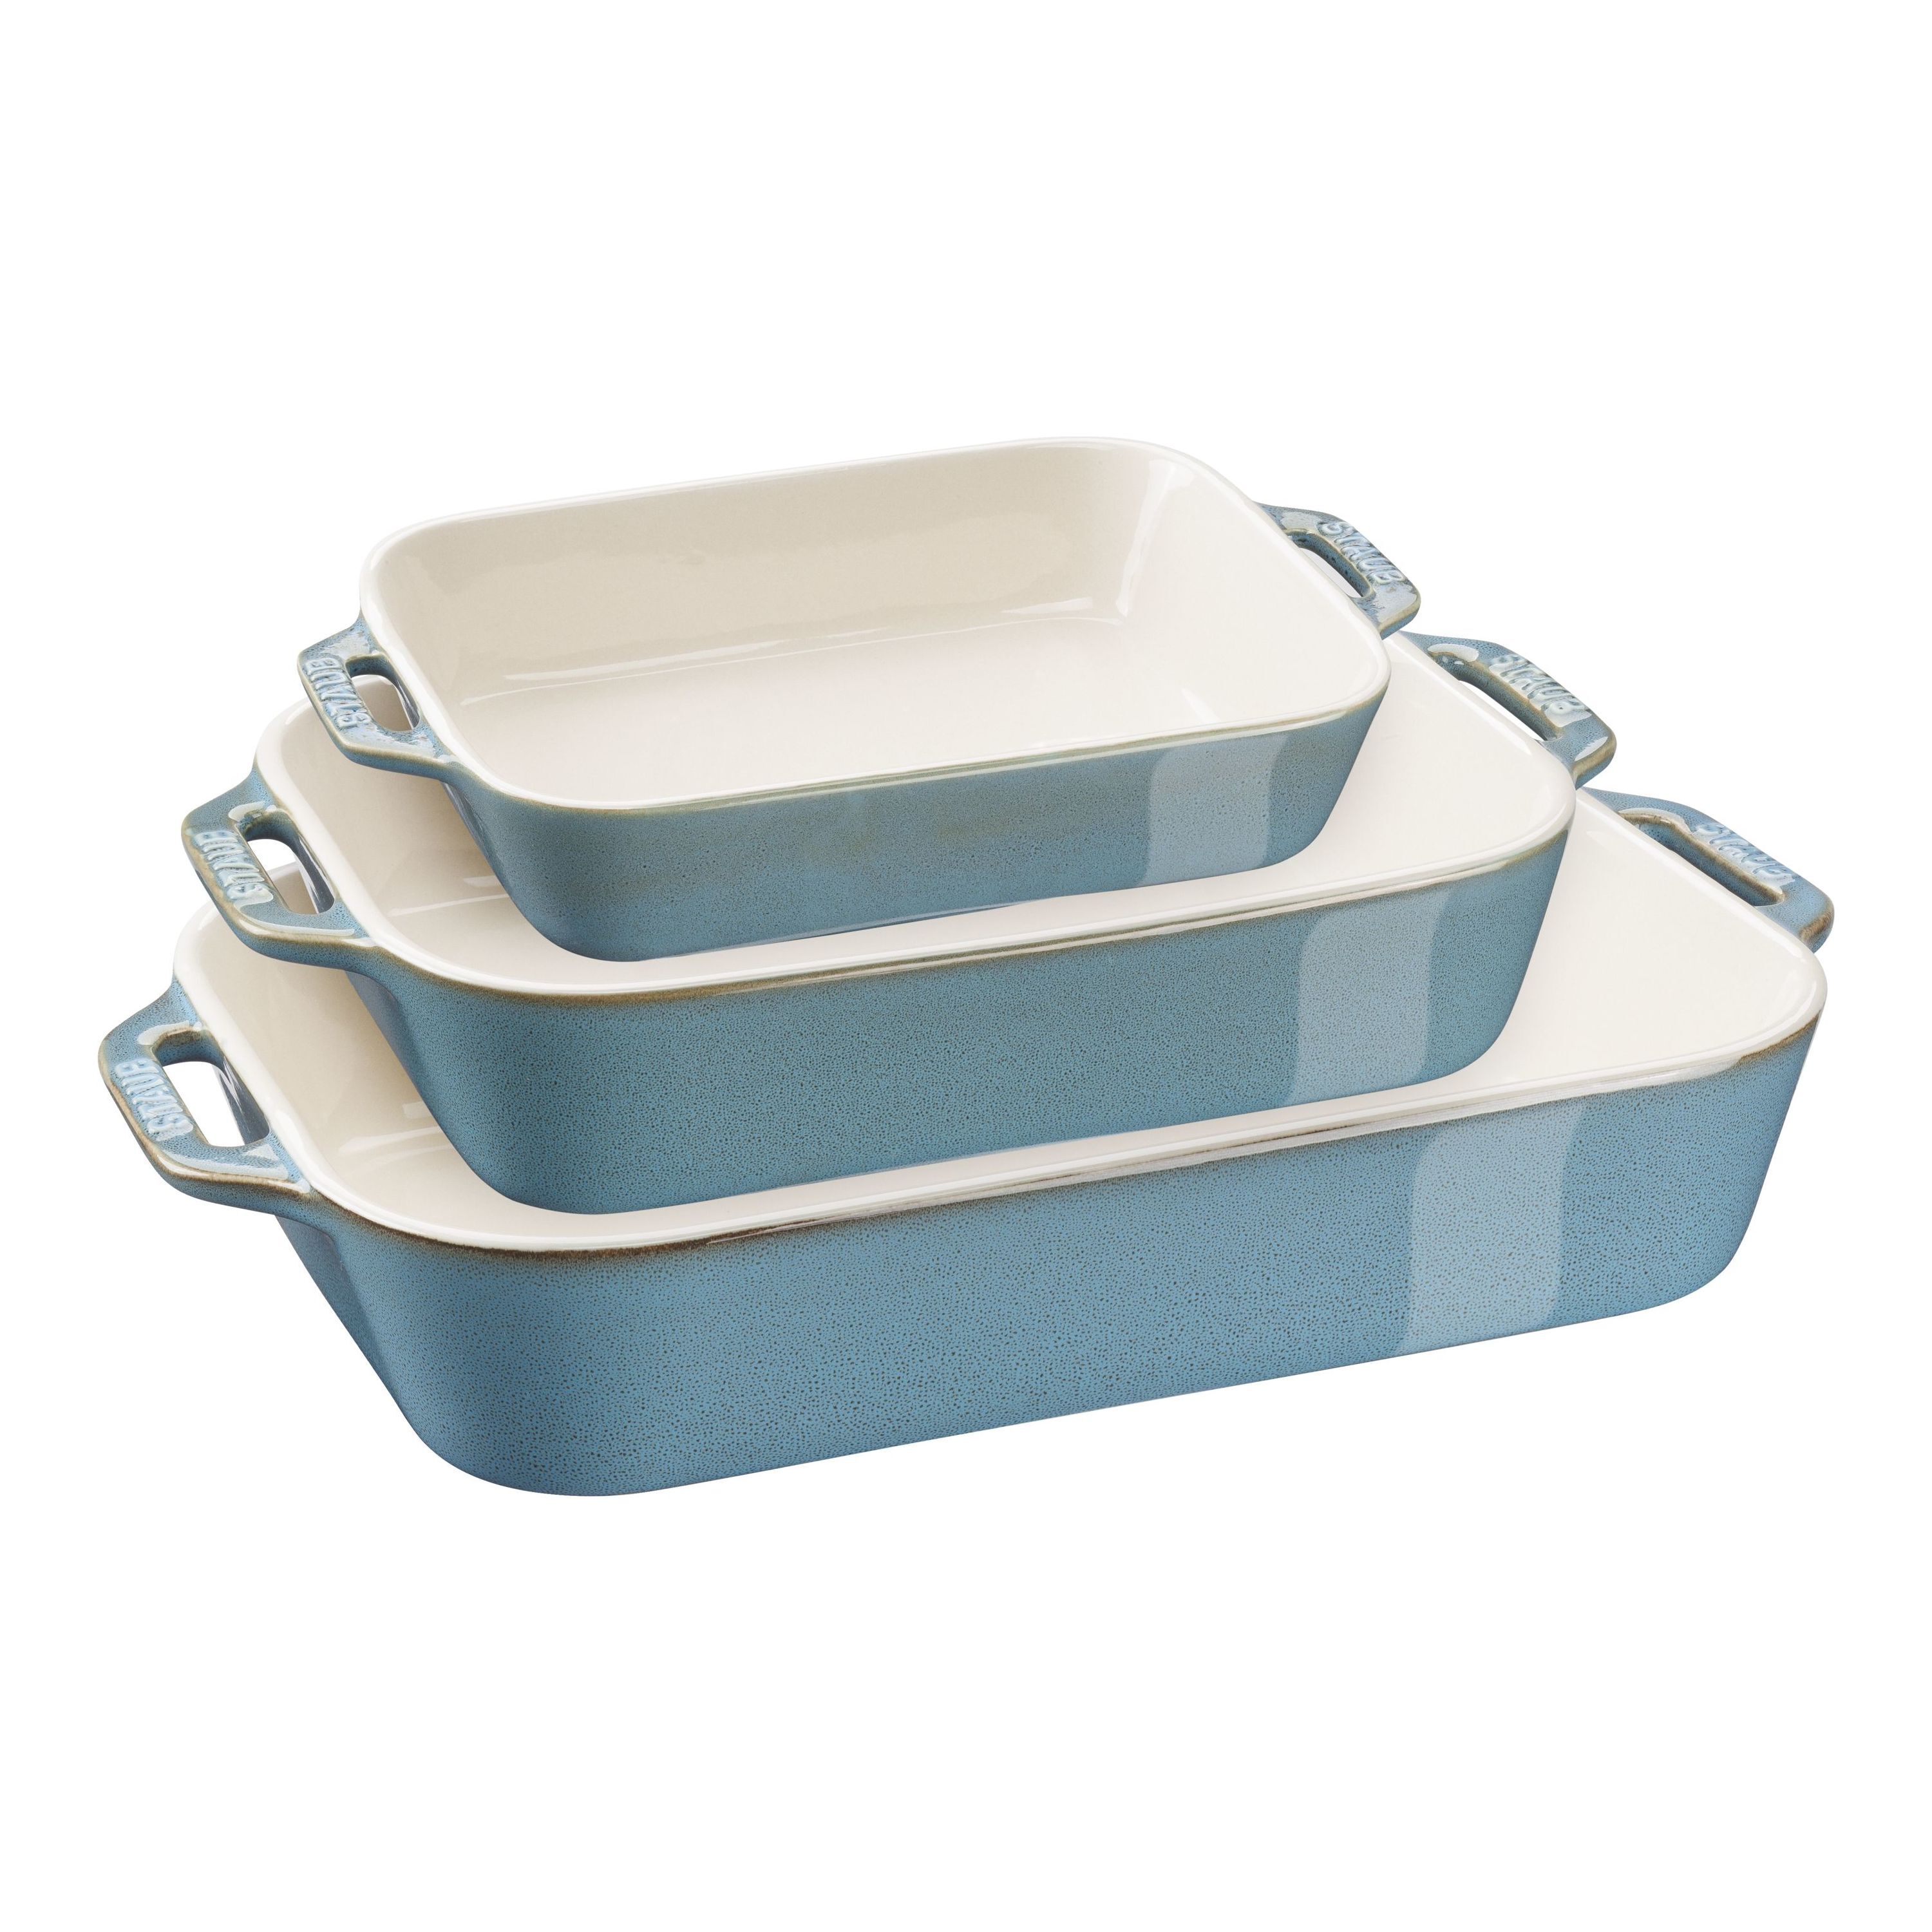 Cooking Lasagna Pans for Oven 9 x 13 Inch Rectangular Bakeware Set Mint Green HAPPY KITCHEN Ceramic Baking Dish Casserole Dish and Daily Use Ceramic Bakeware Set of 3 Piece Microwave 